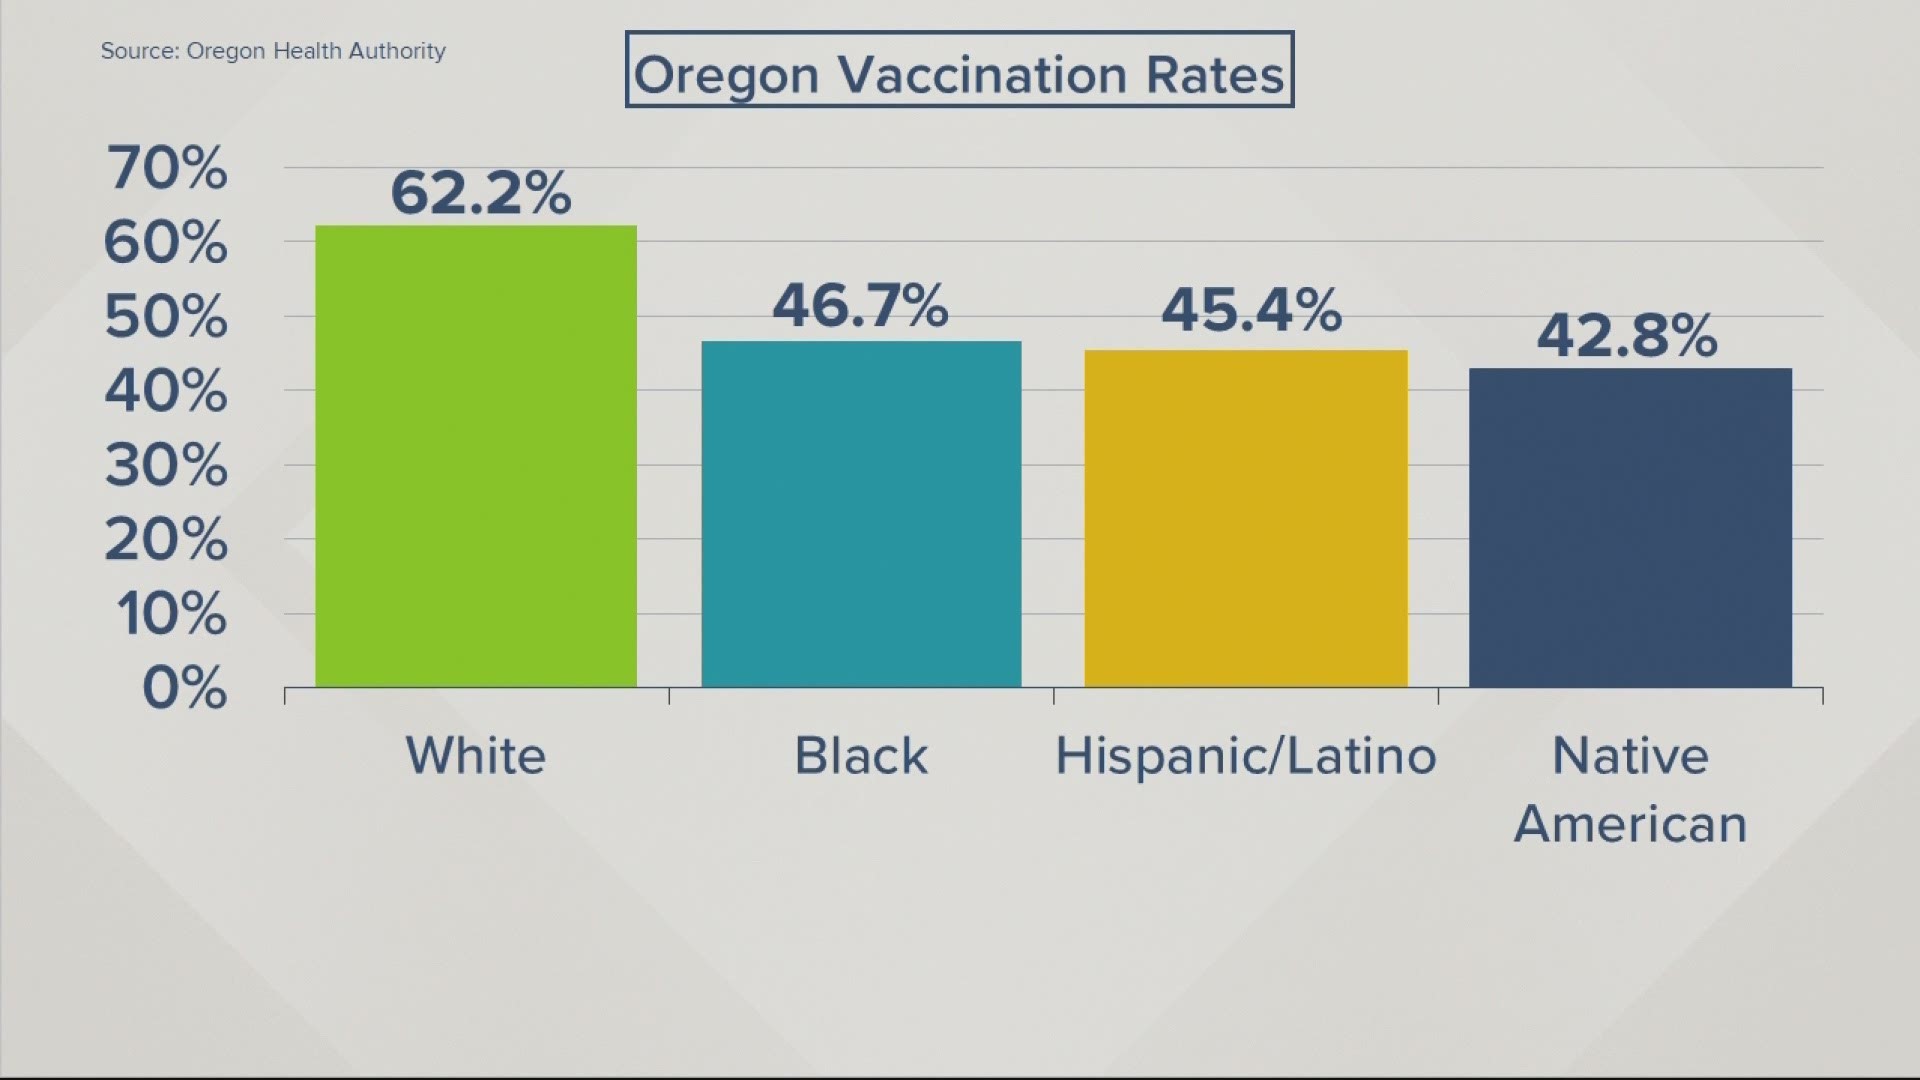 Medical professionals believe vaccines are even more important with the delta COVID-19 variant spreading across the U.S. and Oregon.